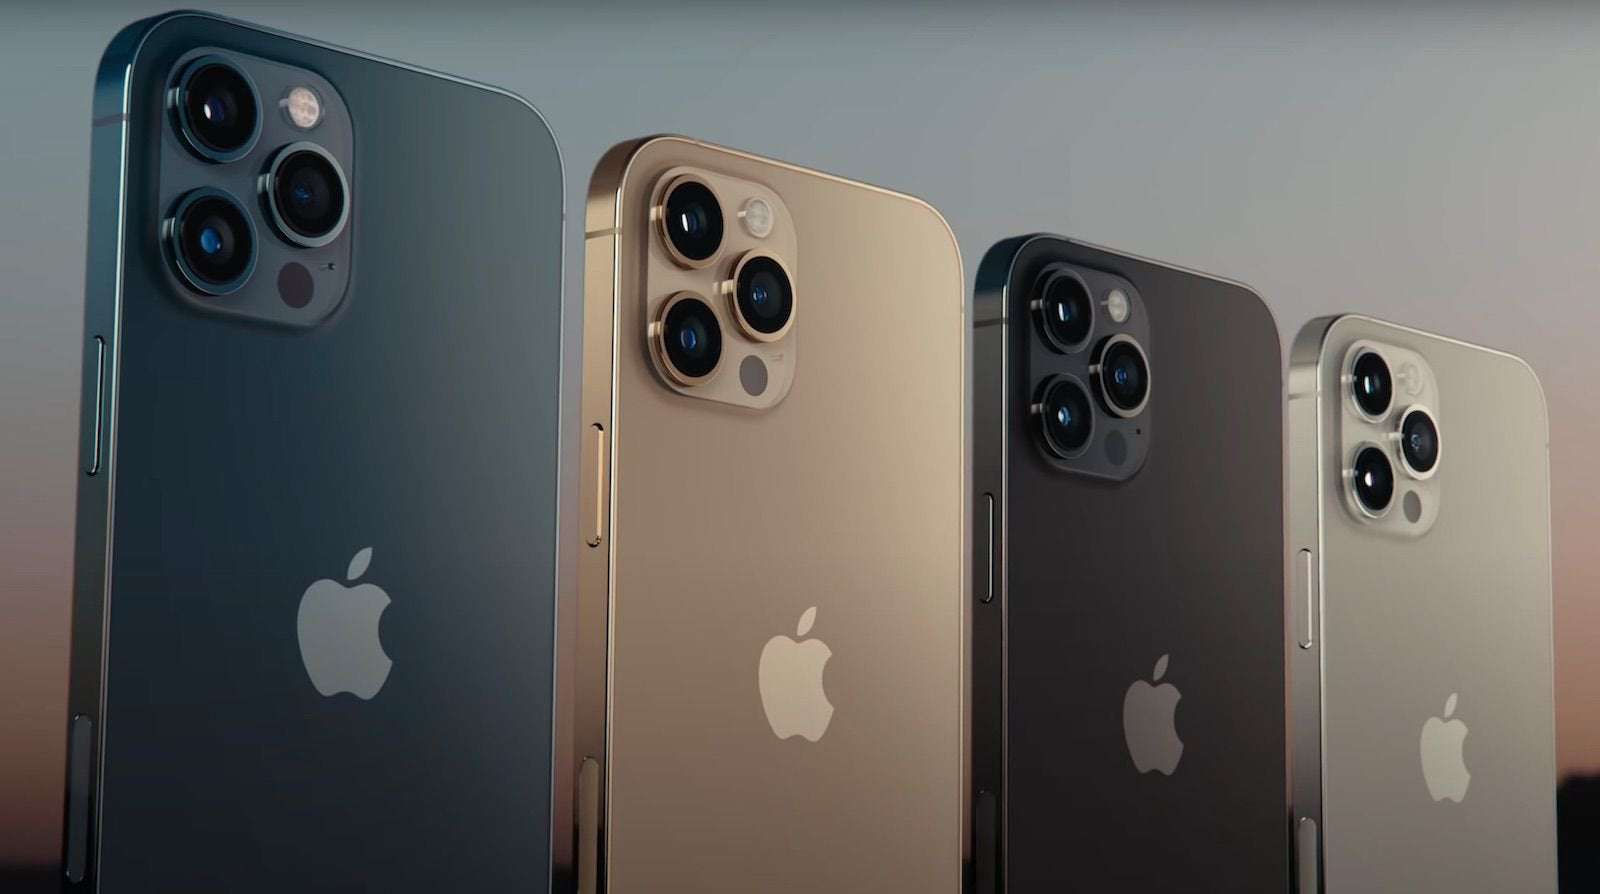 image for iPhone 12 Pro Pre-Orders Already Selling Out With Delivery Times Pushing Into November